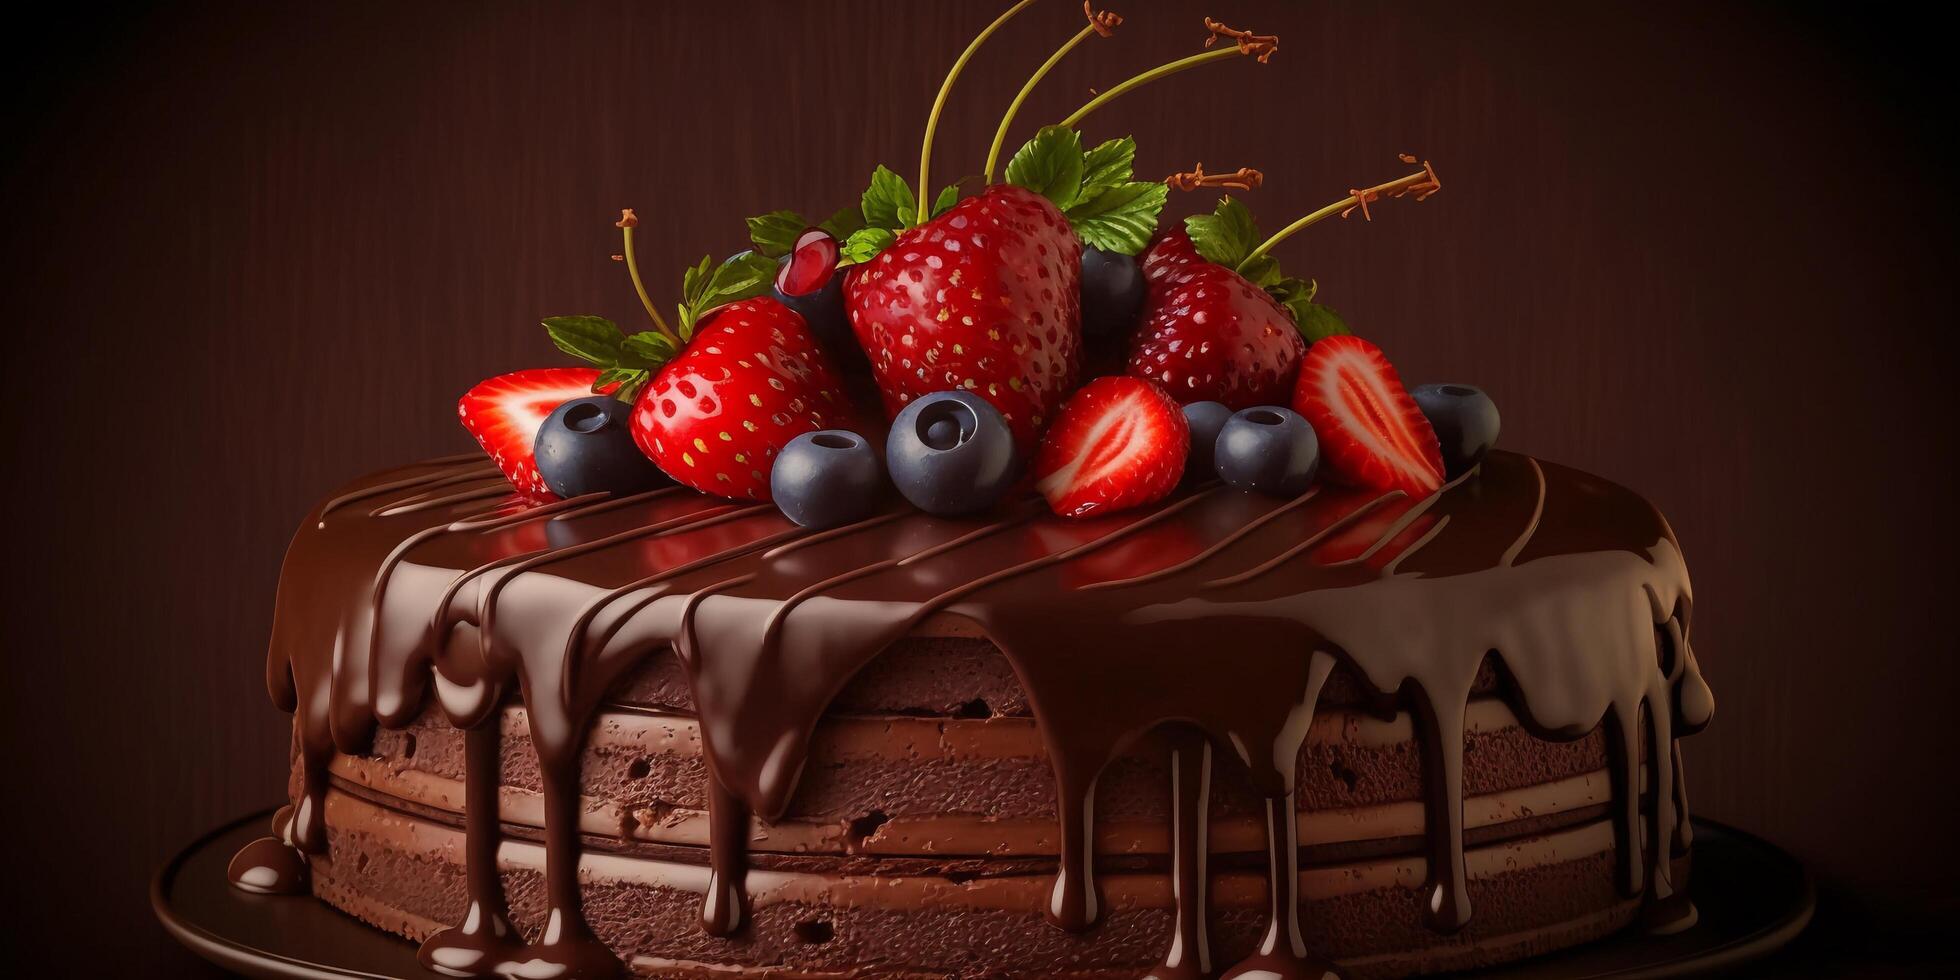 The chocolate cake and strawberry topping with . photo